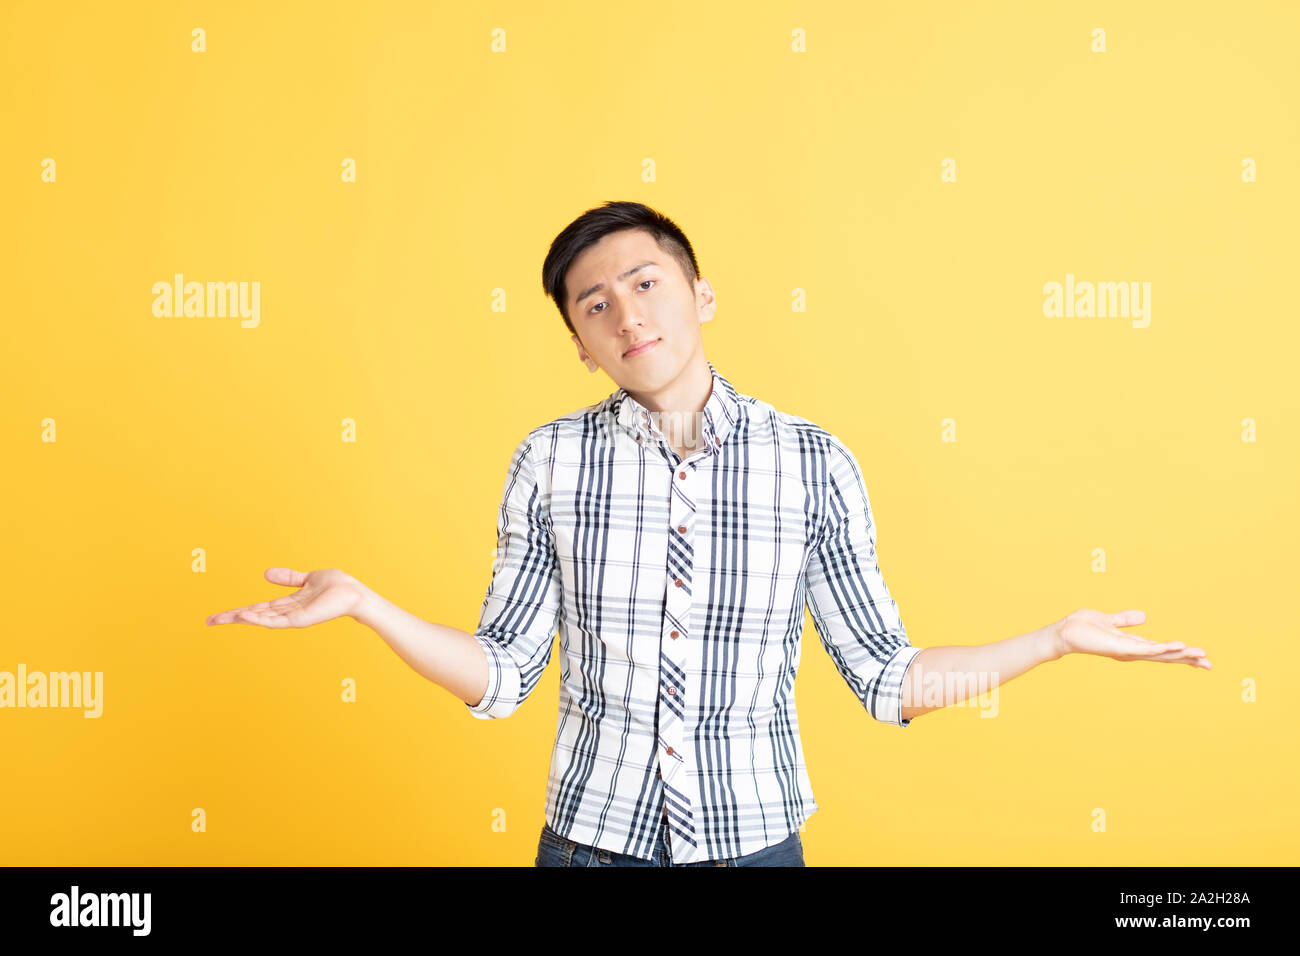 confused young man shrugging shoulders Stock Photo